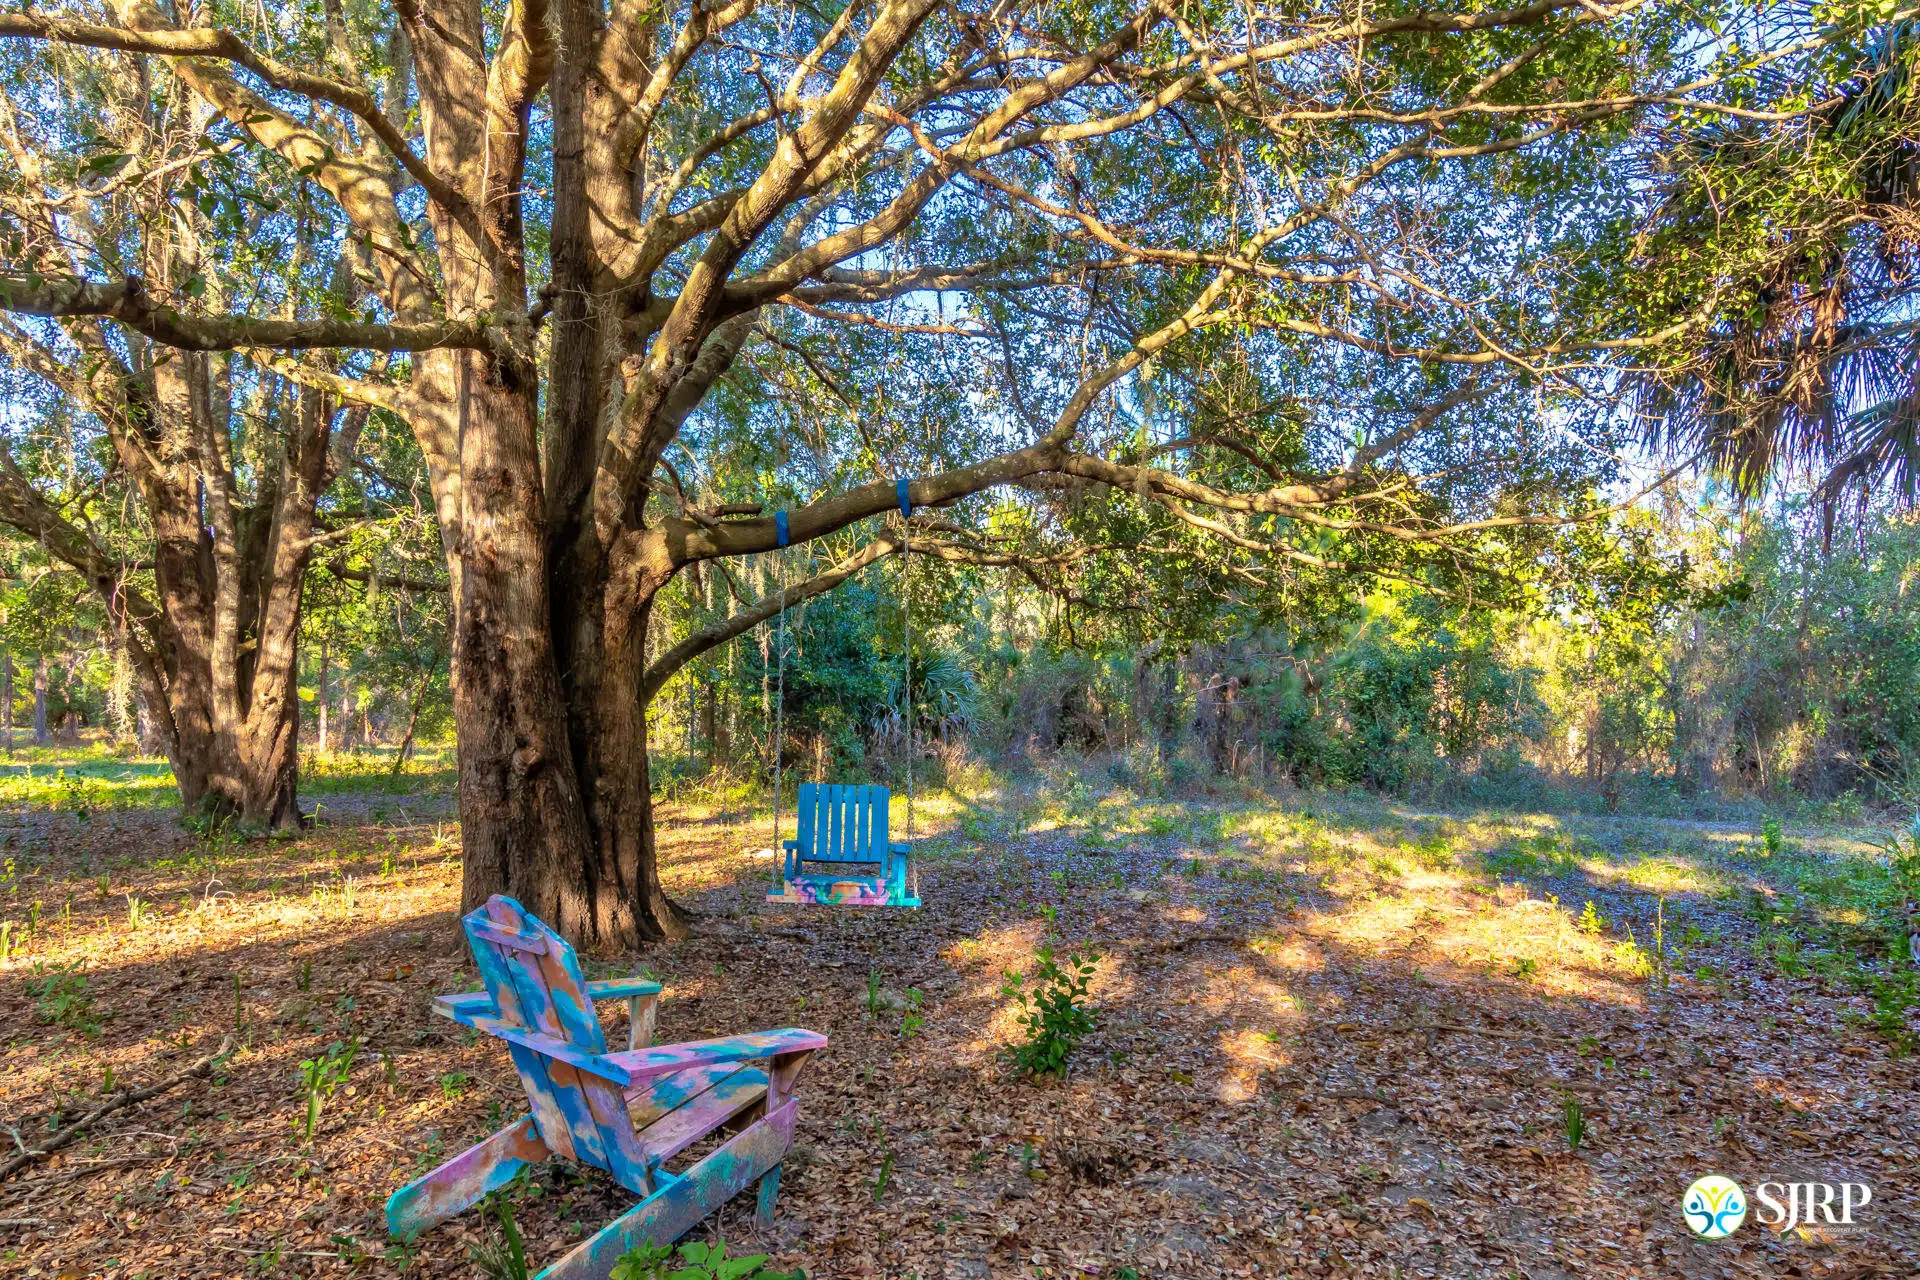 Open are in the middle of the woods with a large tree with a colorful hanging wood tree swing and a colorful adirondack chair.